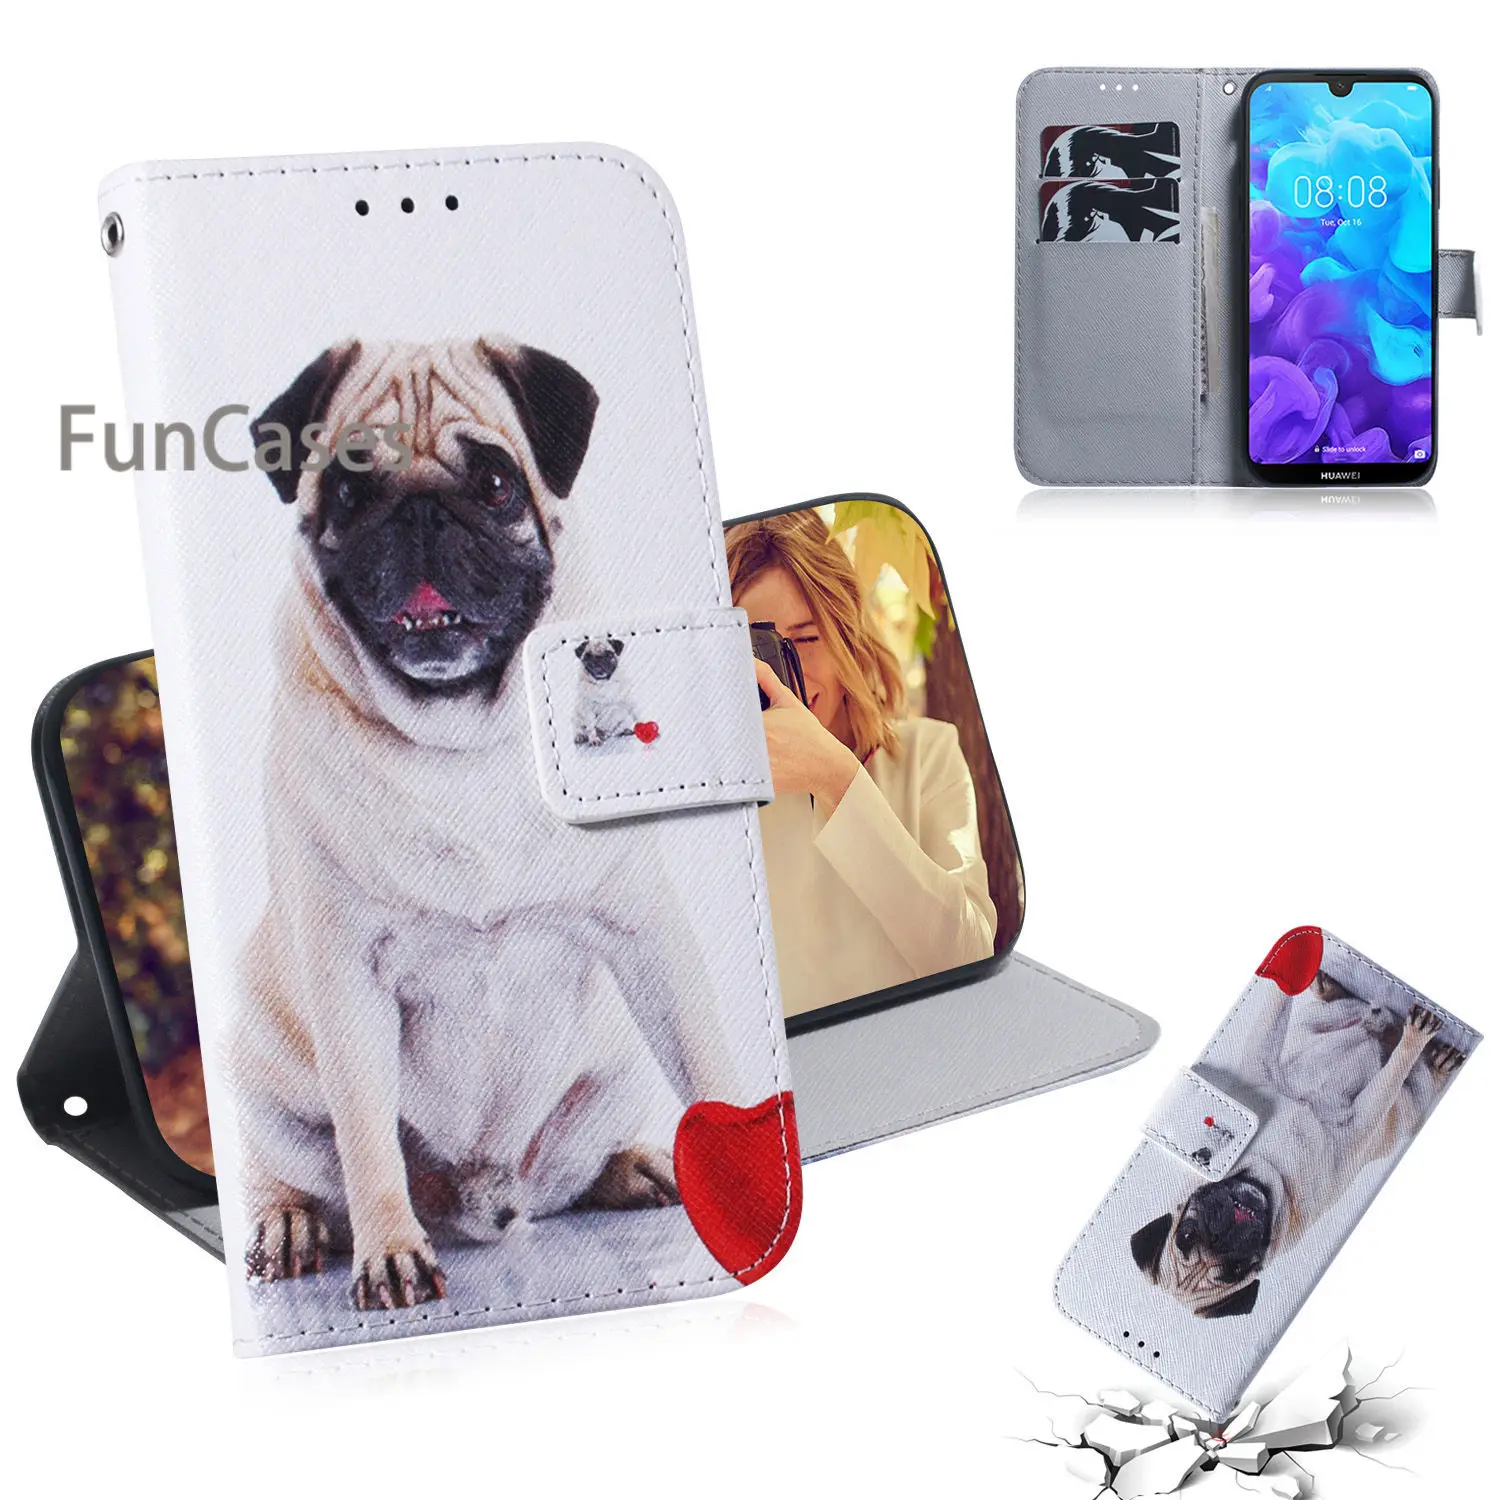 Wolf PU Leather Flip Case For capa Huawei Y5 2019 Case Squishy TPU Cases Movil sFor Huawei etui Honor 8S Phone Pouch Huwawei